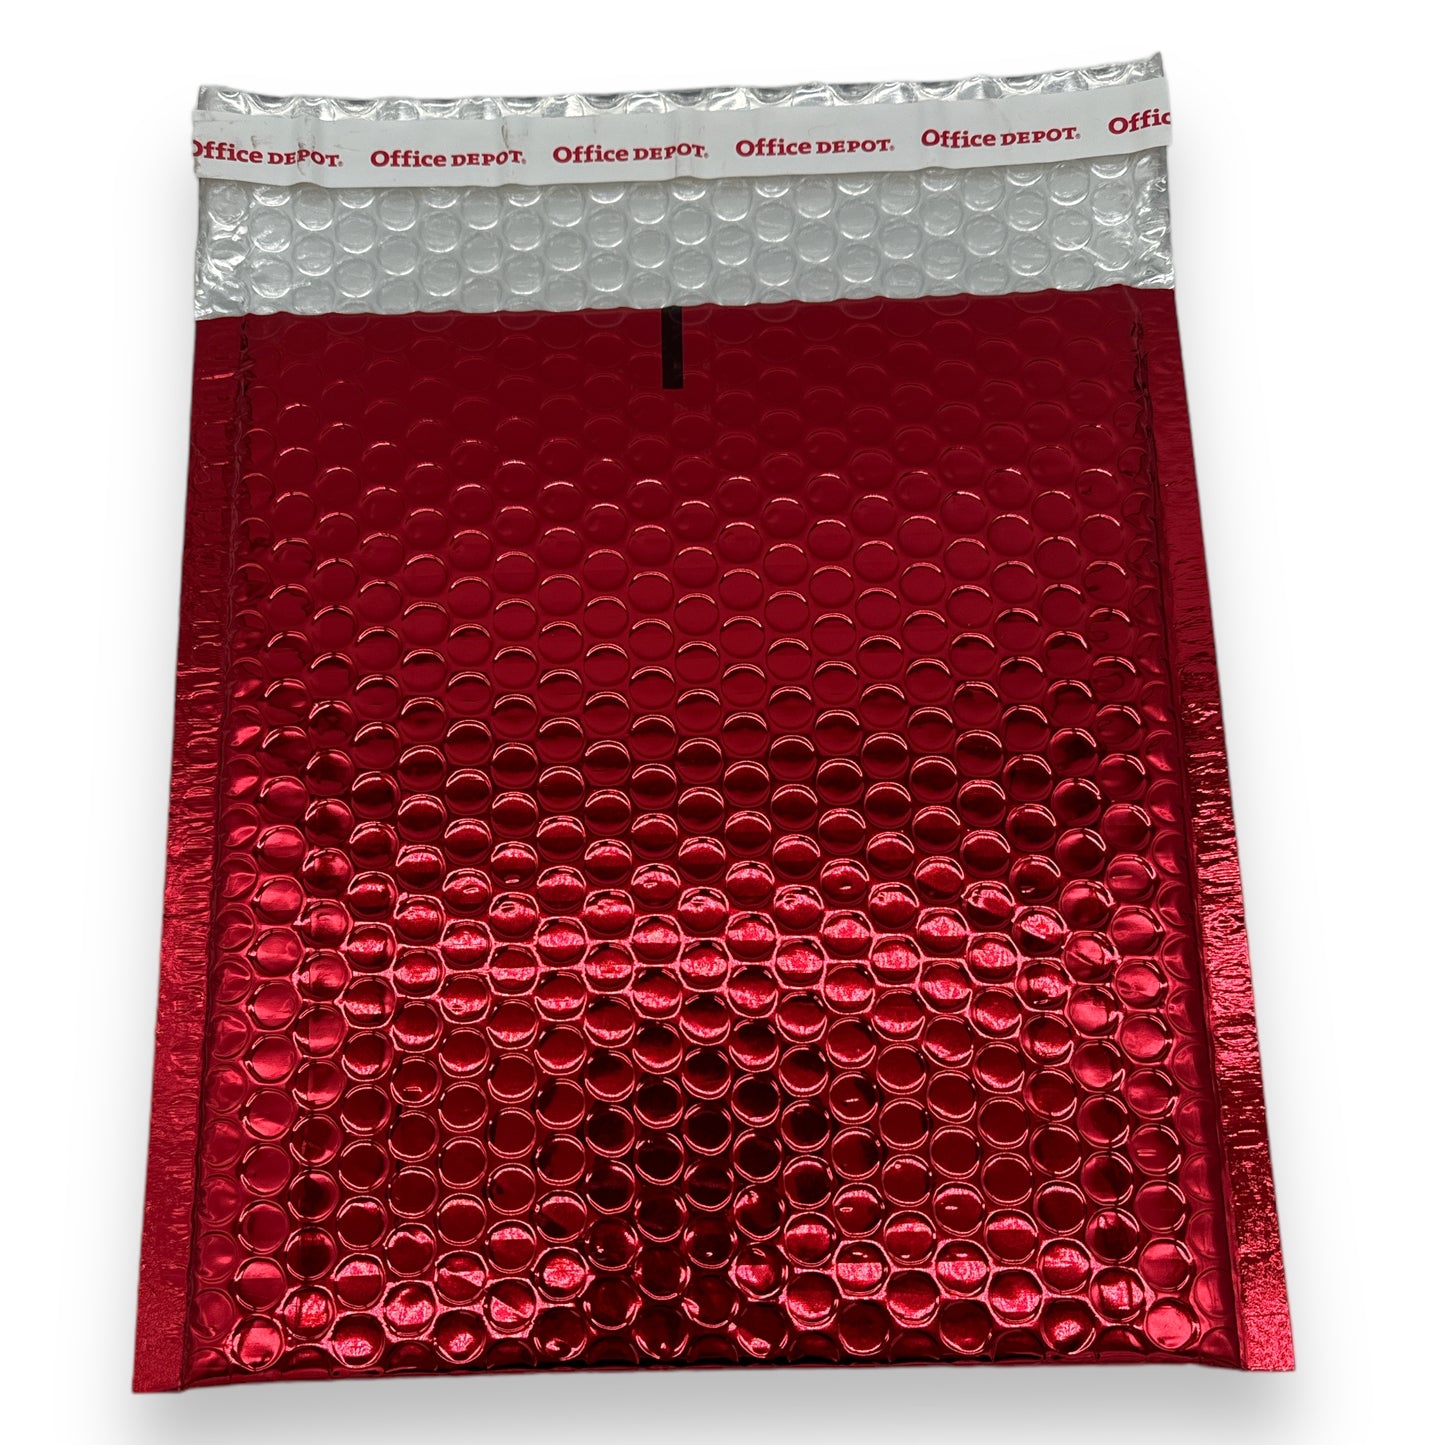 Timmy Toys - PP004 - Metallic Glossy Bubble Envelop - 24X25cm - Red - 1 Piece